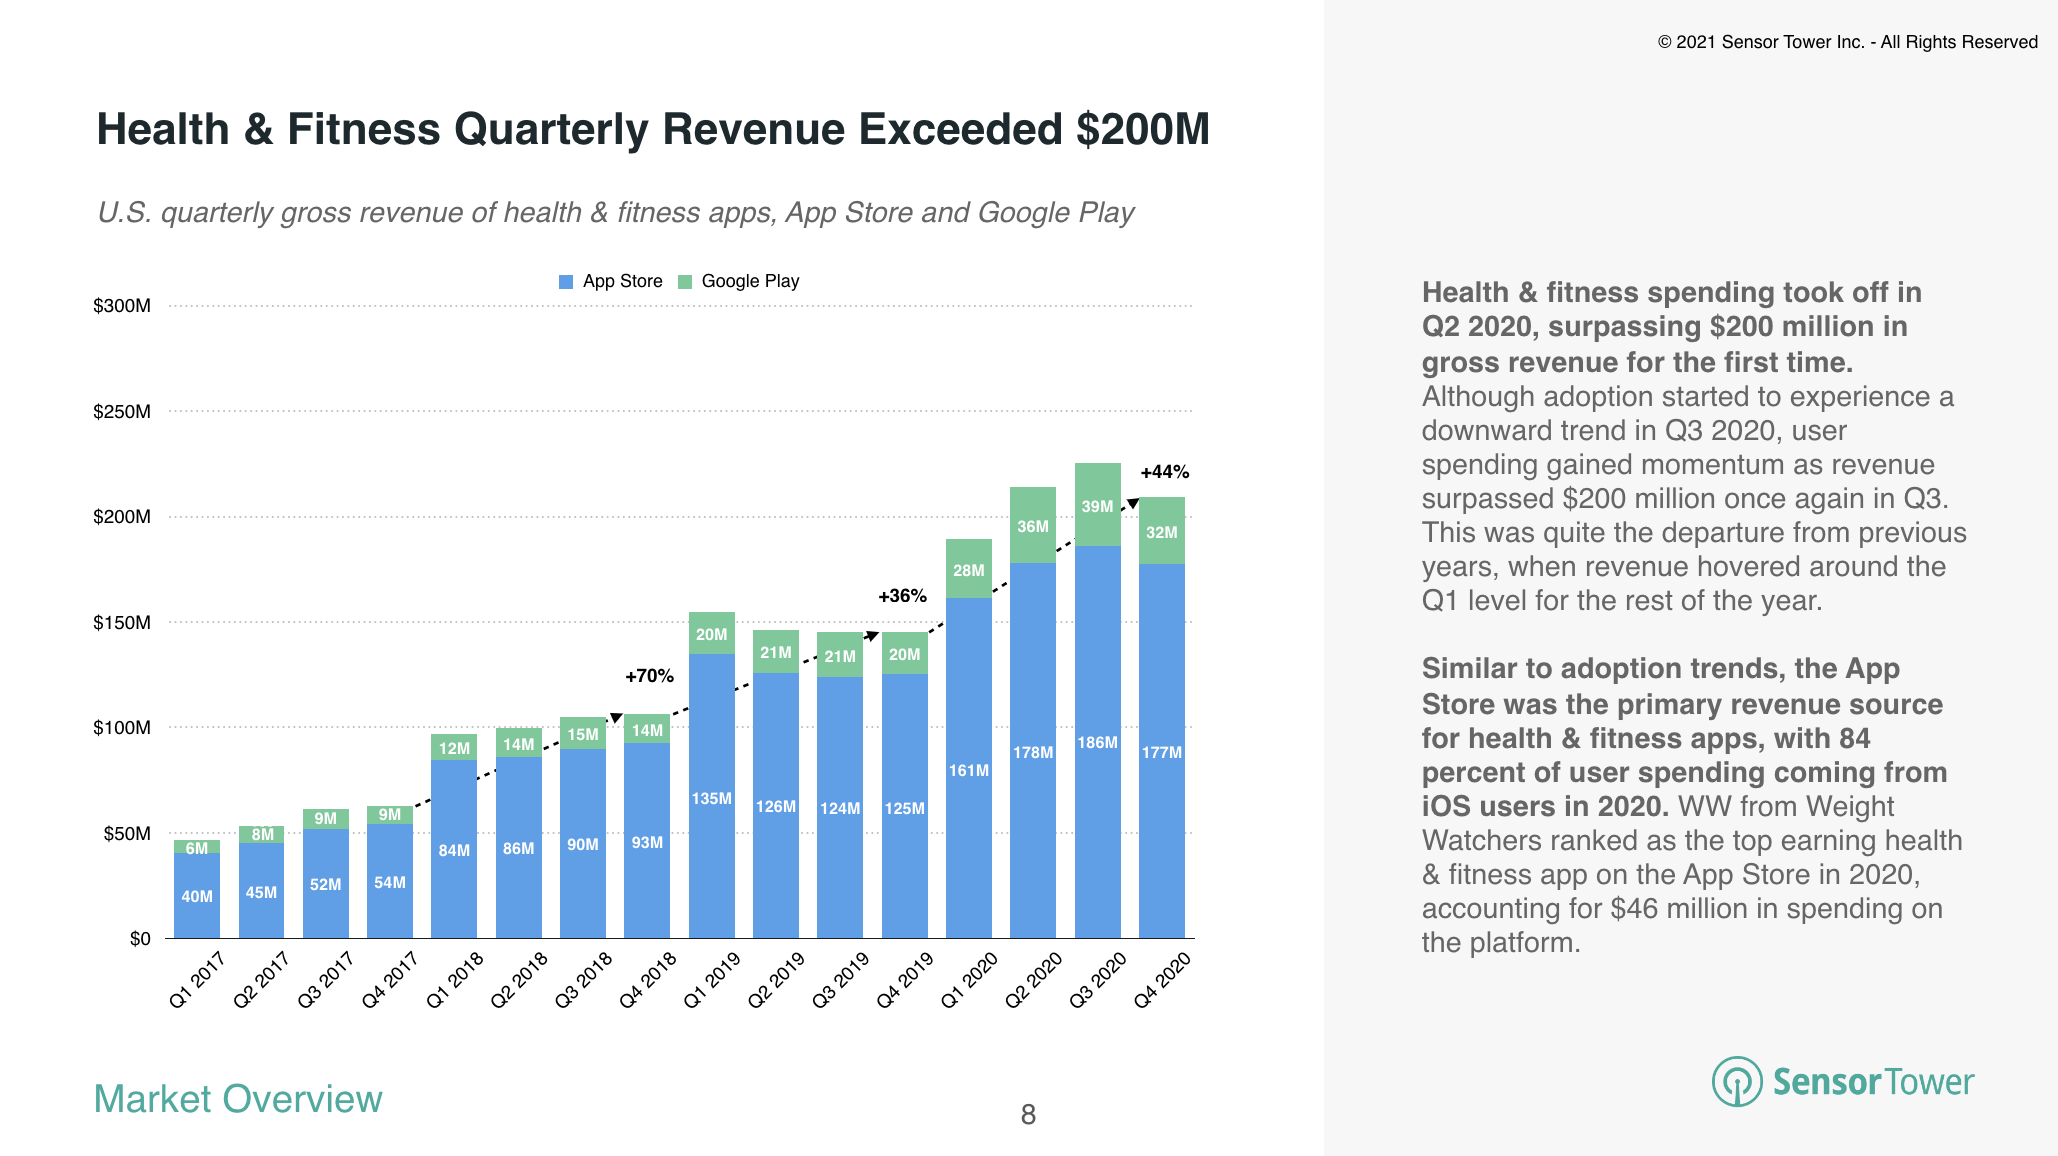 U.S. health and fitness apps saw the most consumer spending ever in Q3 2020